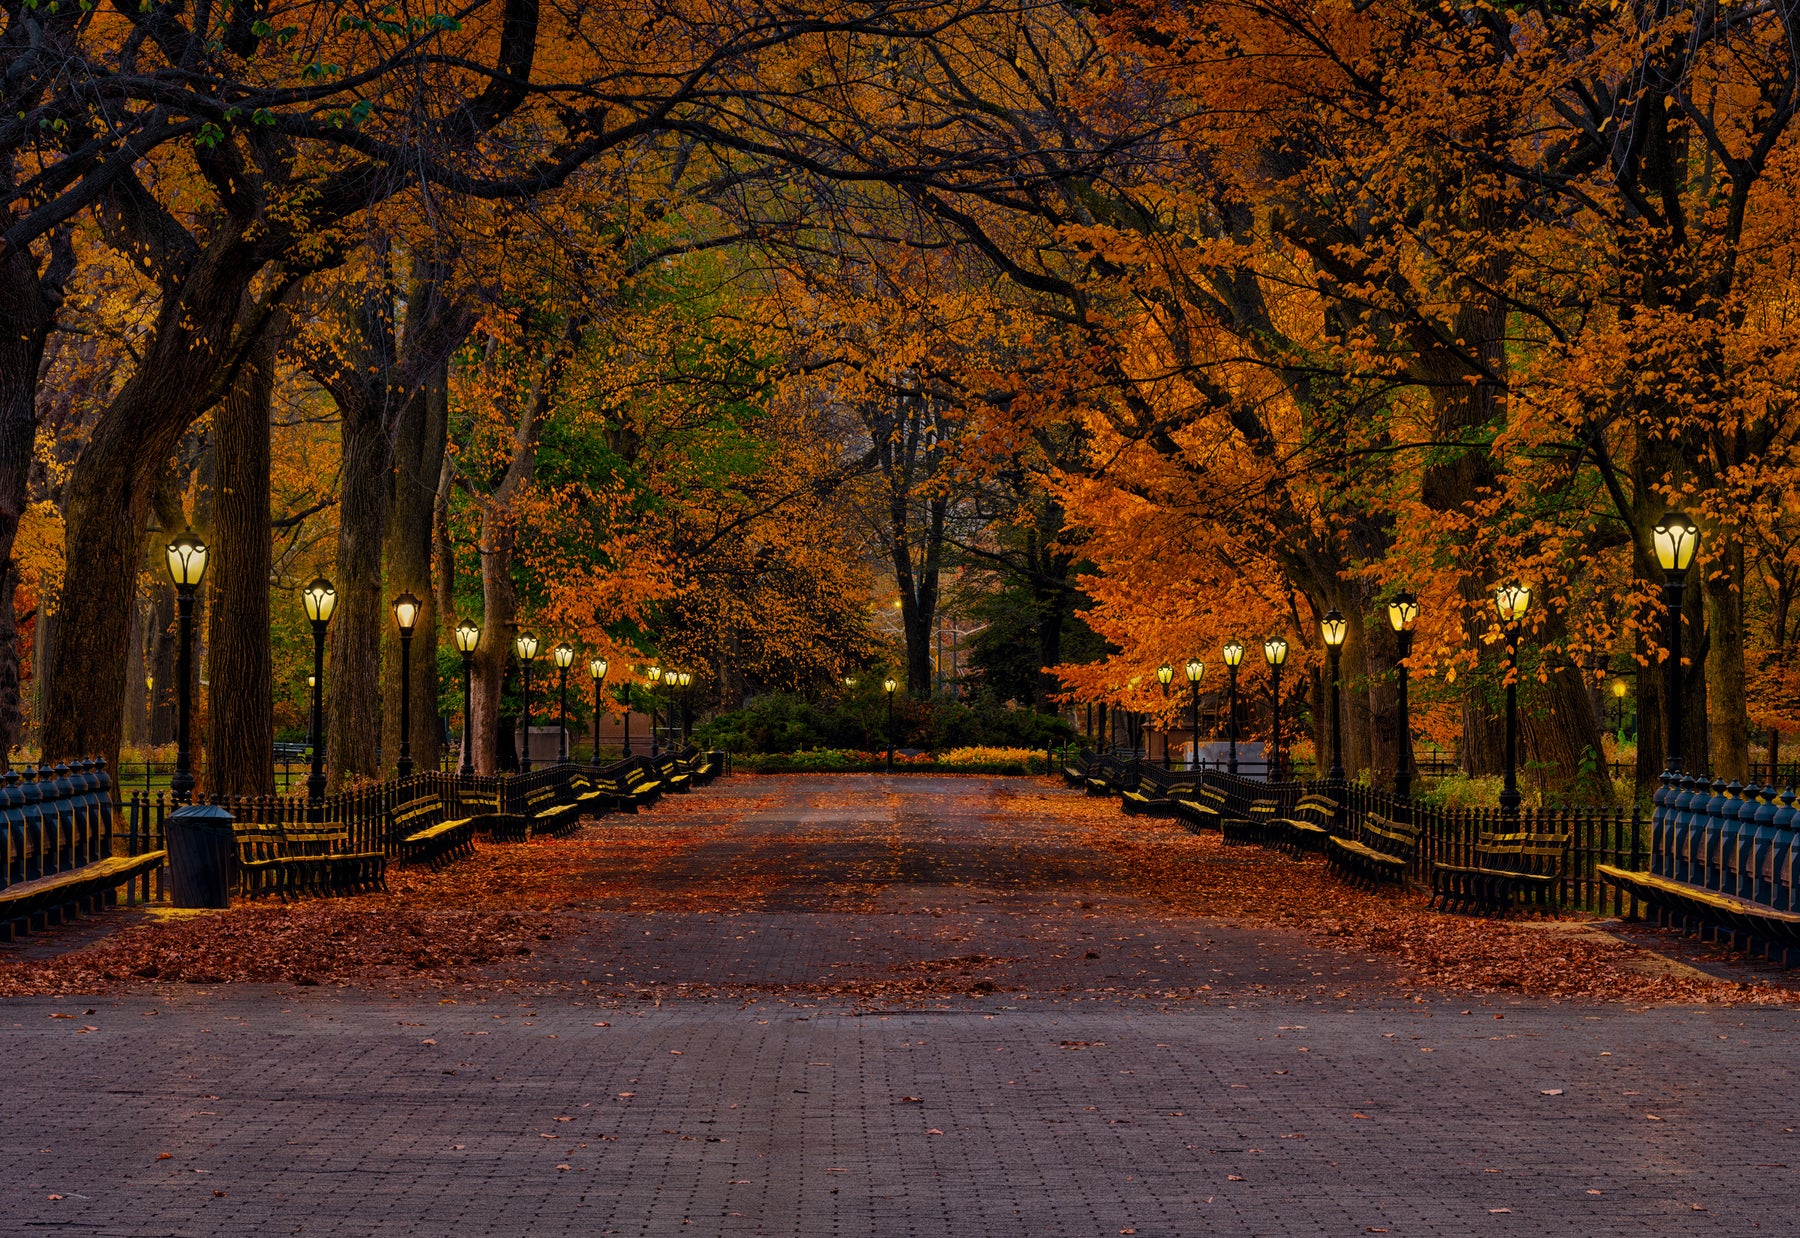 Photograph by Peter Lik titled Evening in the Park | LIK Fine Art